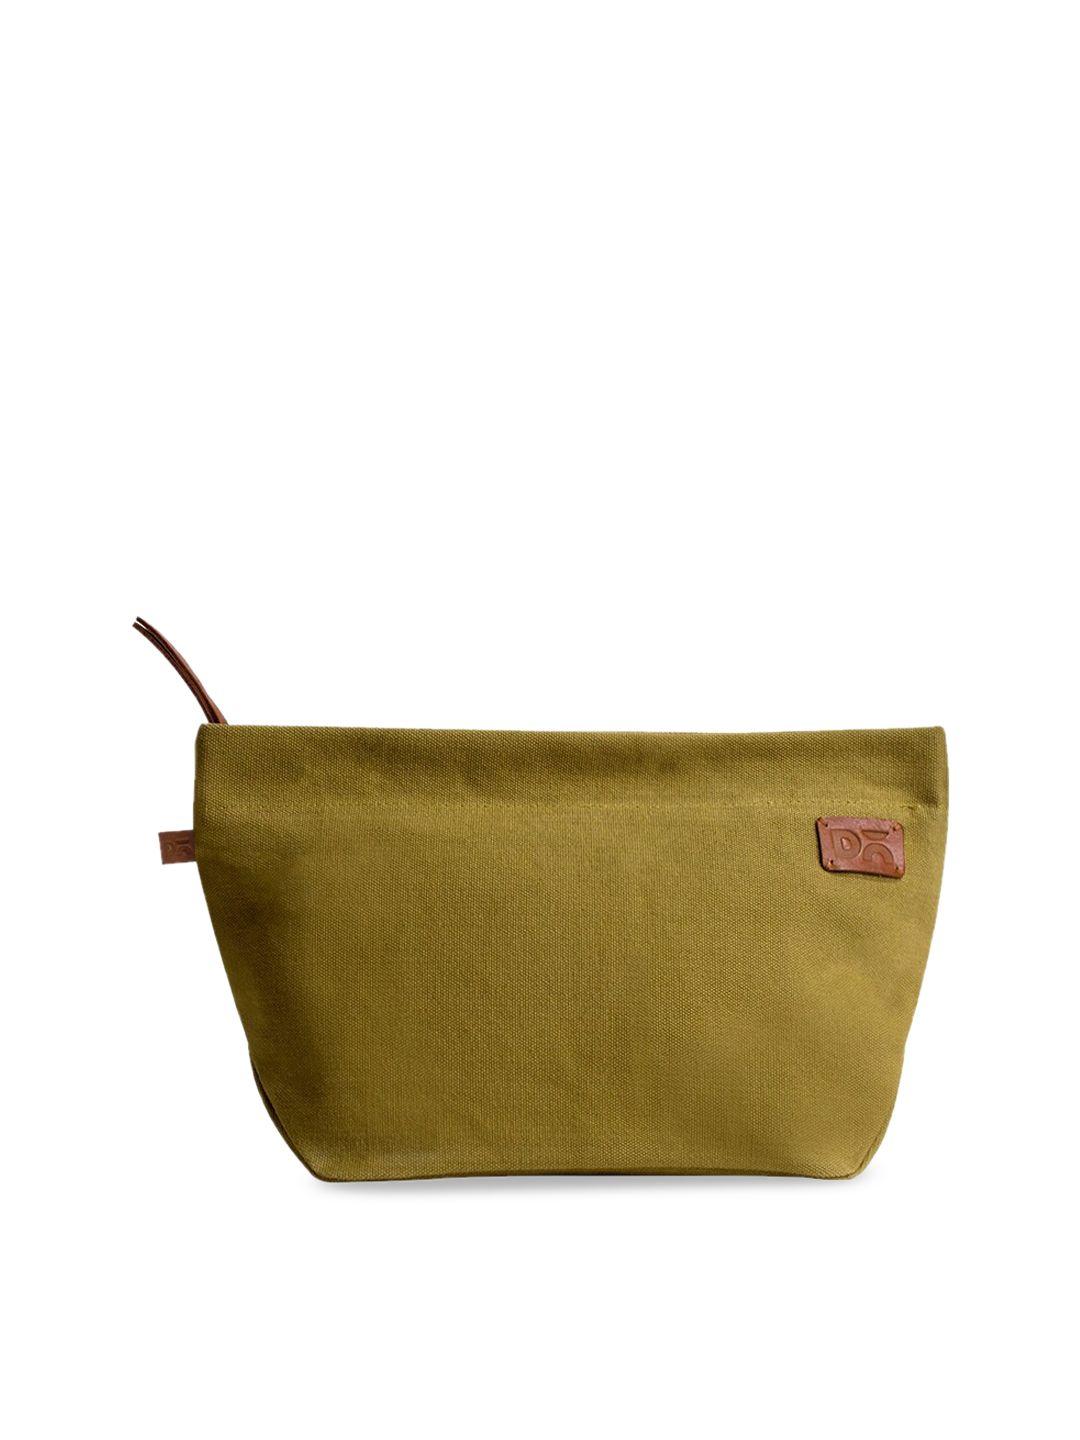 dailyobjects olive green solid regular organiser pouch